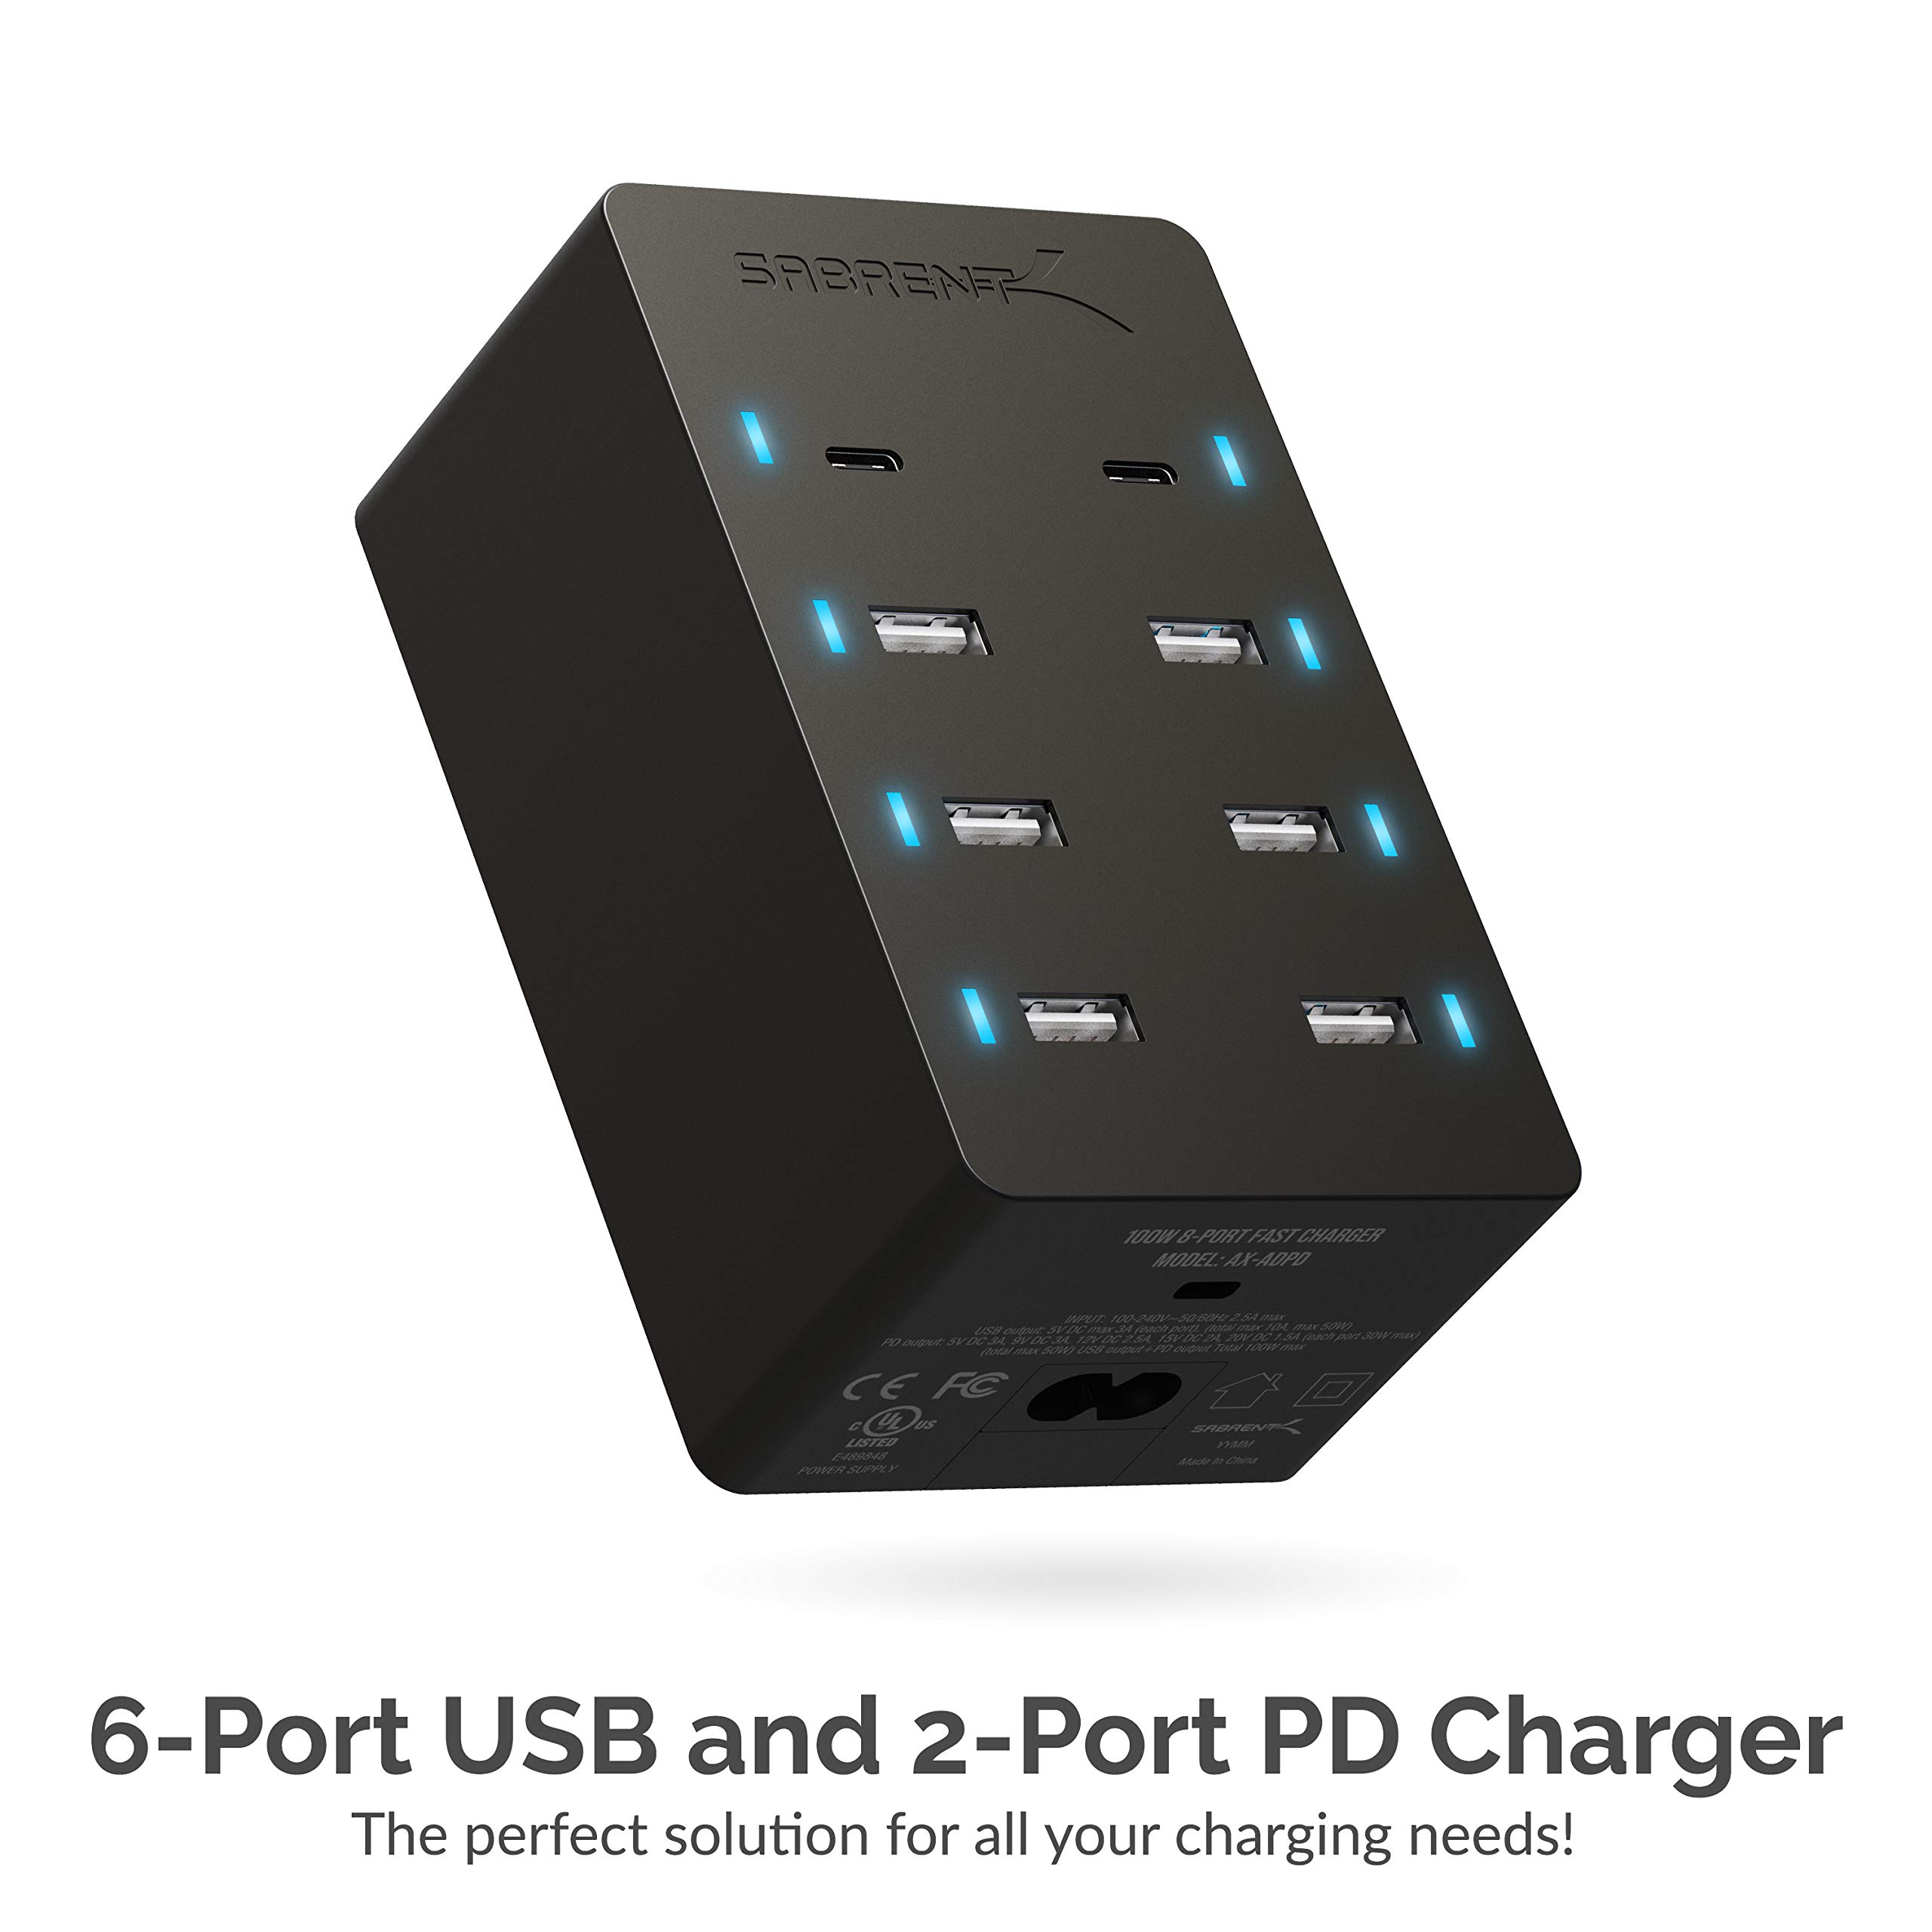 SABRENT 100 Watt 8 Port Family Sized USB Rapid Charger [UL Certified ] Includes 2 PD (Power Delivery) Ports (AX-ADPD)